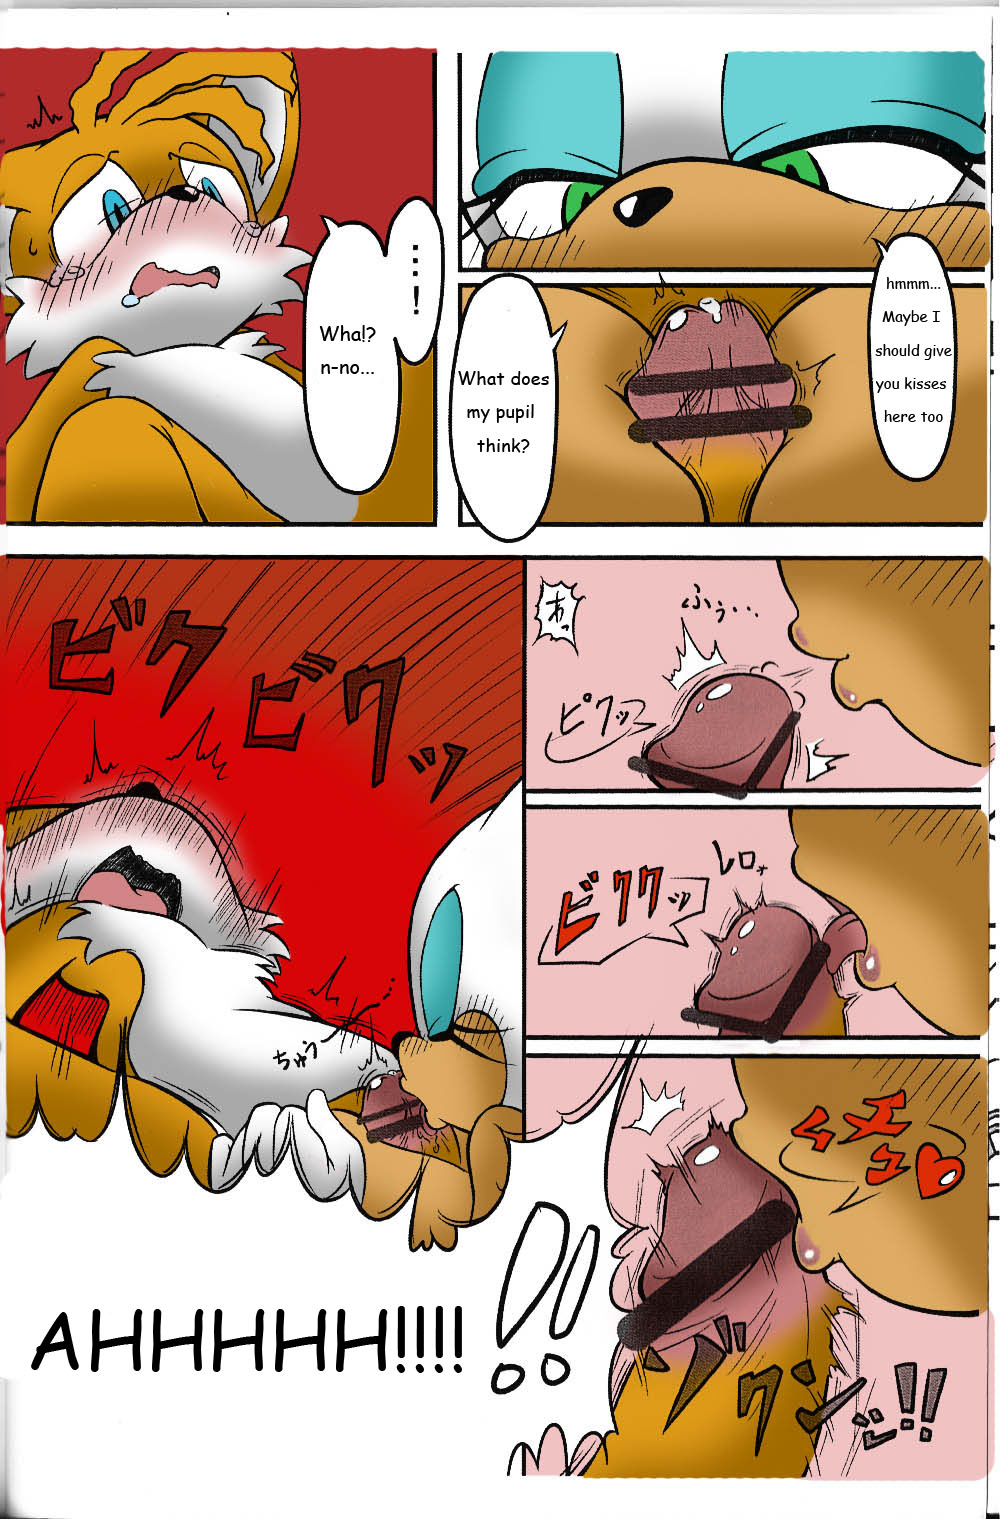 Canned Furry Porn - Kemono no Kanzume | Canned Furry - Page 9 - HentaiEra